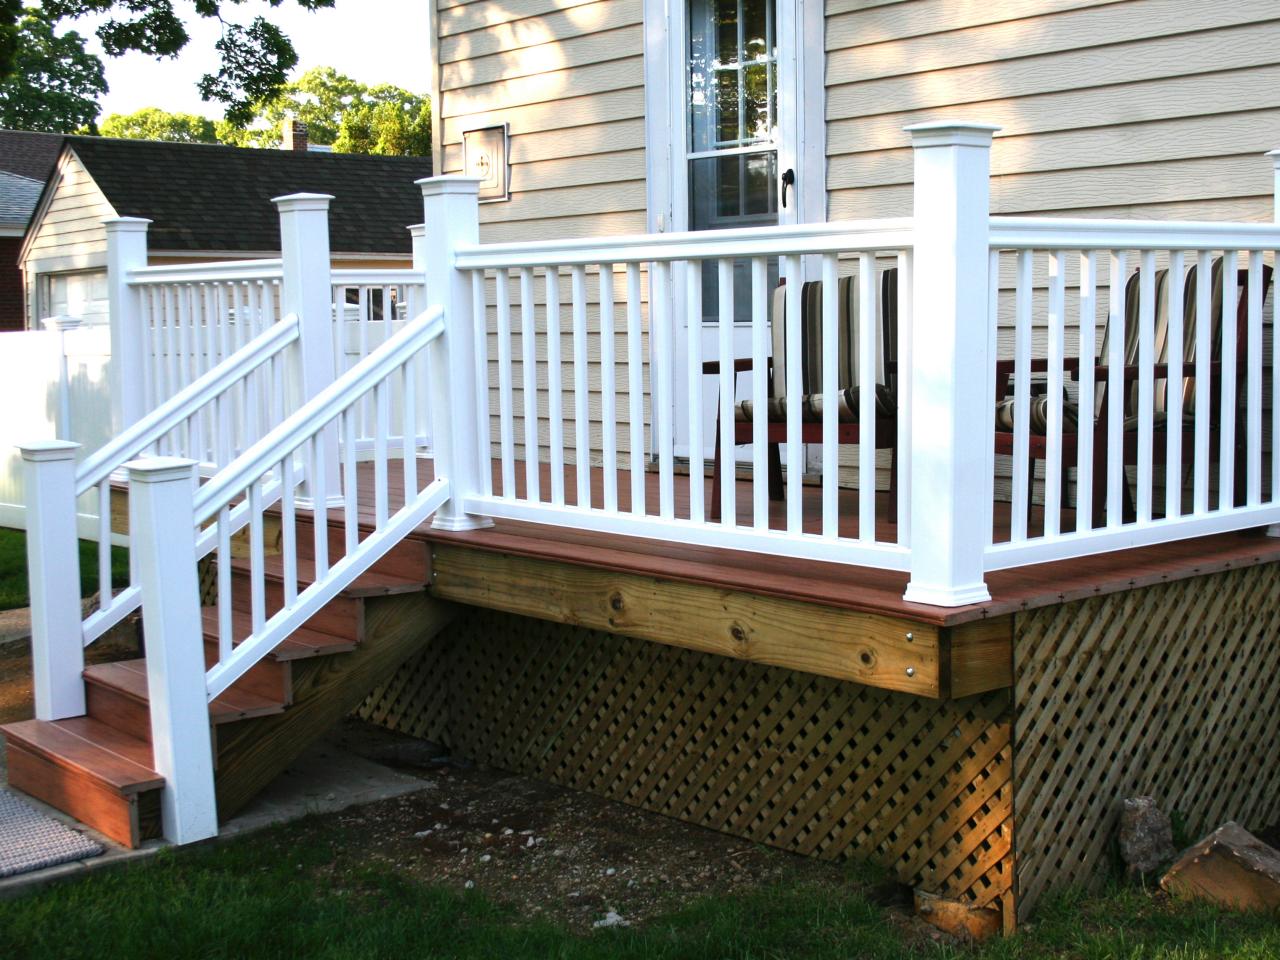 Where can you find plans for outdoor decks?